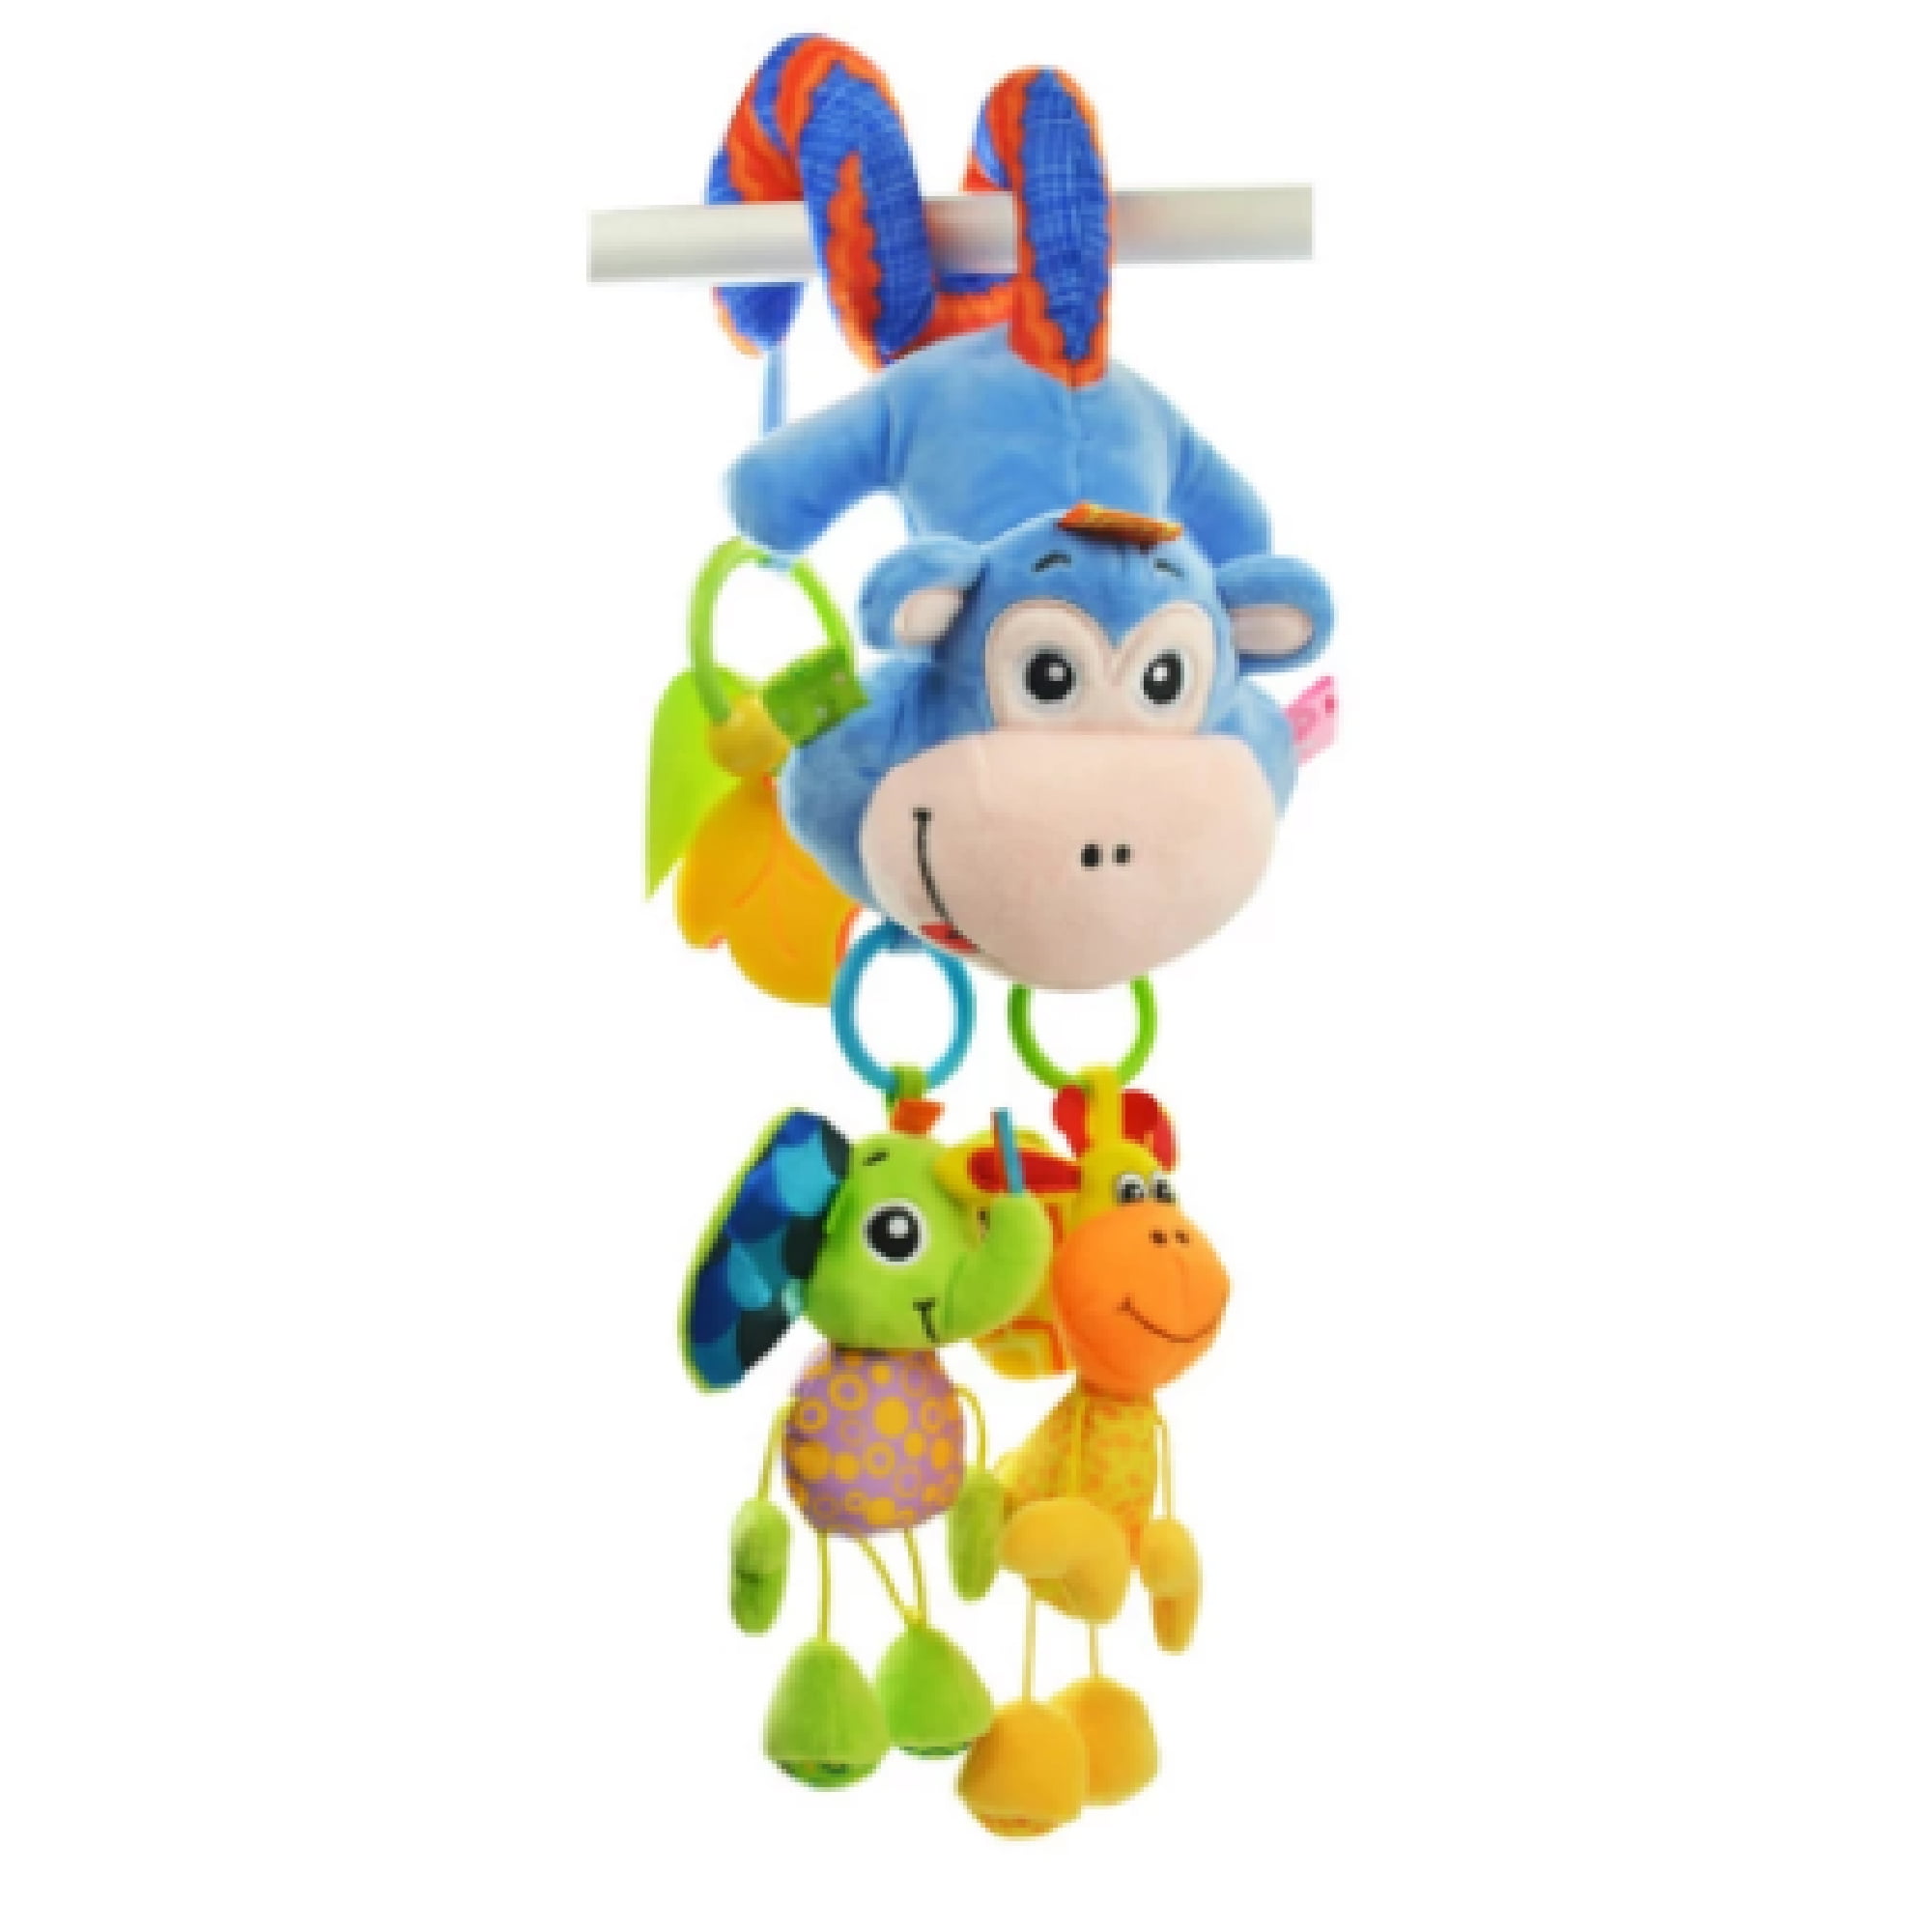 sozzy giraffe baby placate toy rattle multi-purpose pull music playtime pal 1pc 